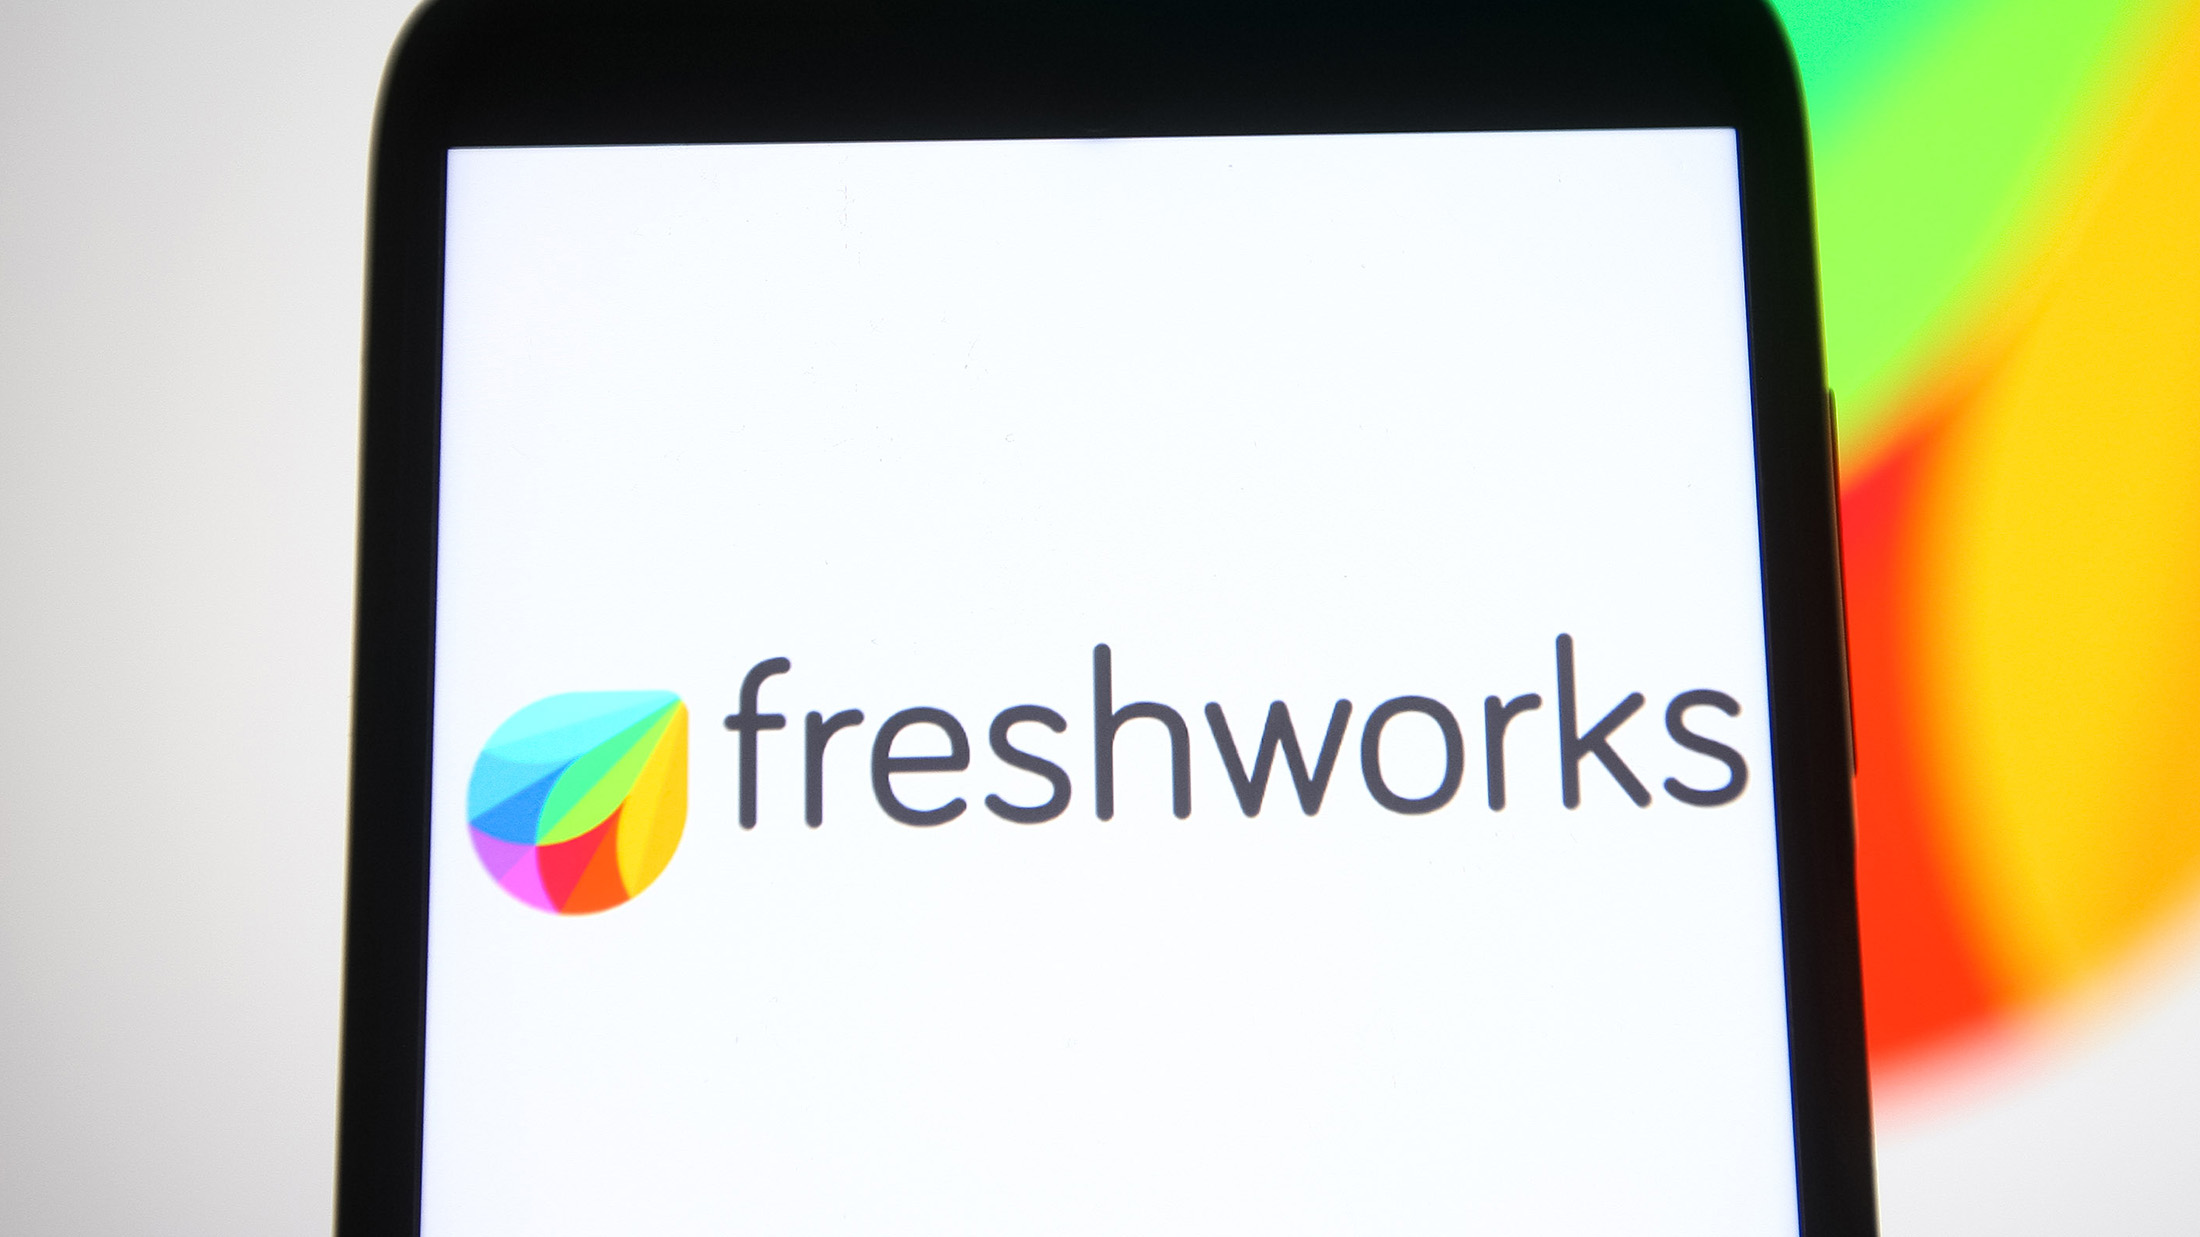 FreshWorks Is One of TIME's Best Inventions of 2018